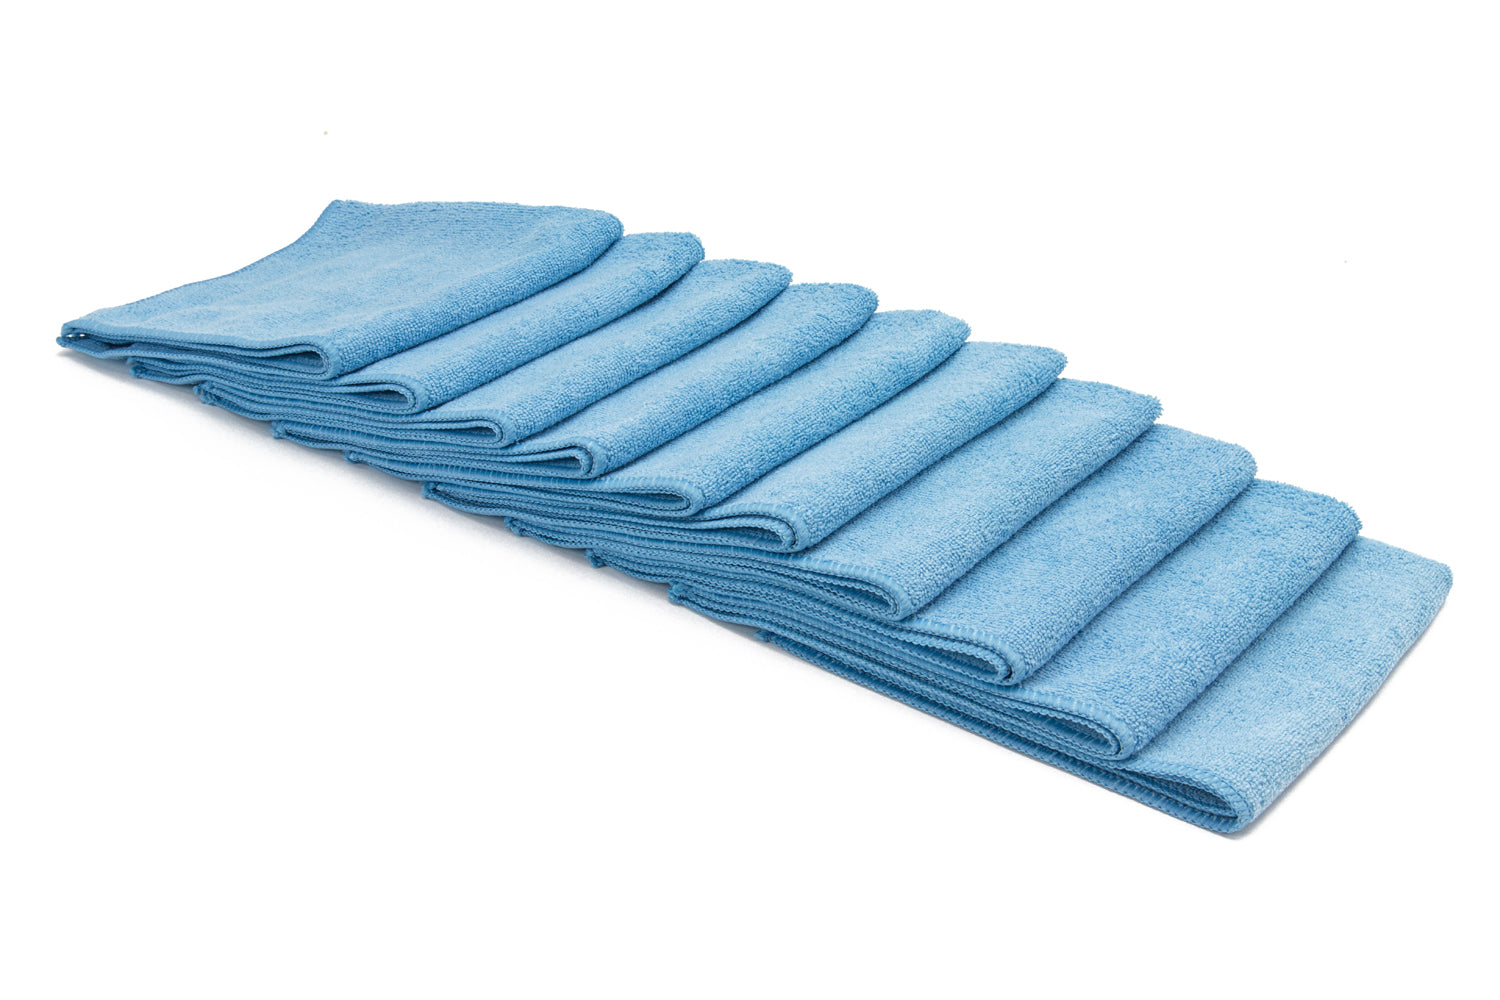 Autofiber Blue / Stitched [Utility 300] All-Purpose Edgeless Microfiber Towel (16 in x 16 in., 300 gsm) 10pack